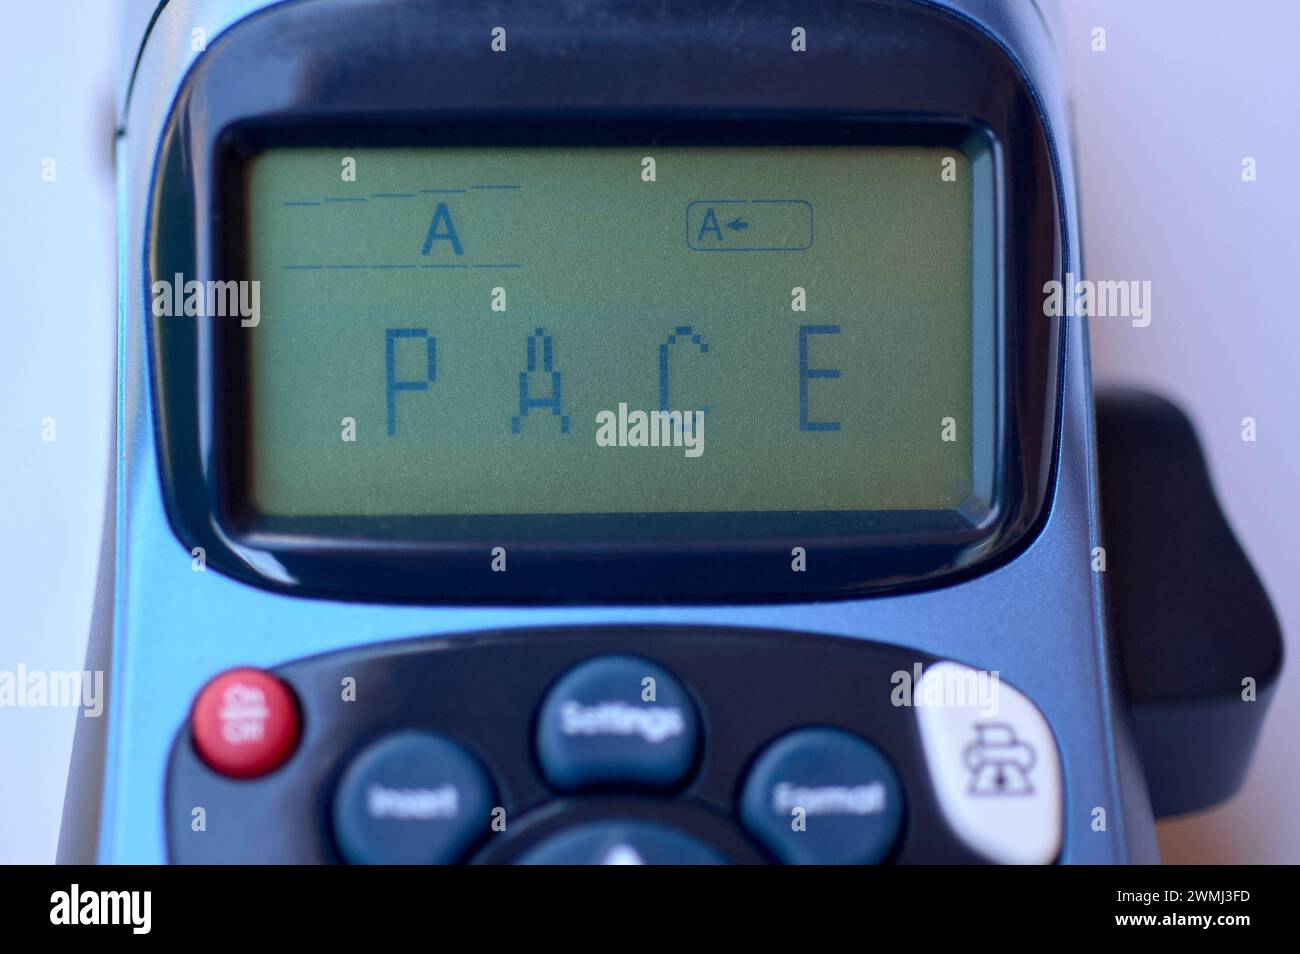 Image of a thermal printer with the word peace on the screen, symbolizing harmony in a digital context. Stock Photo